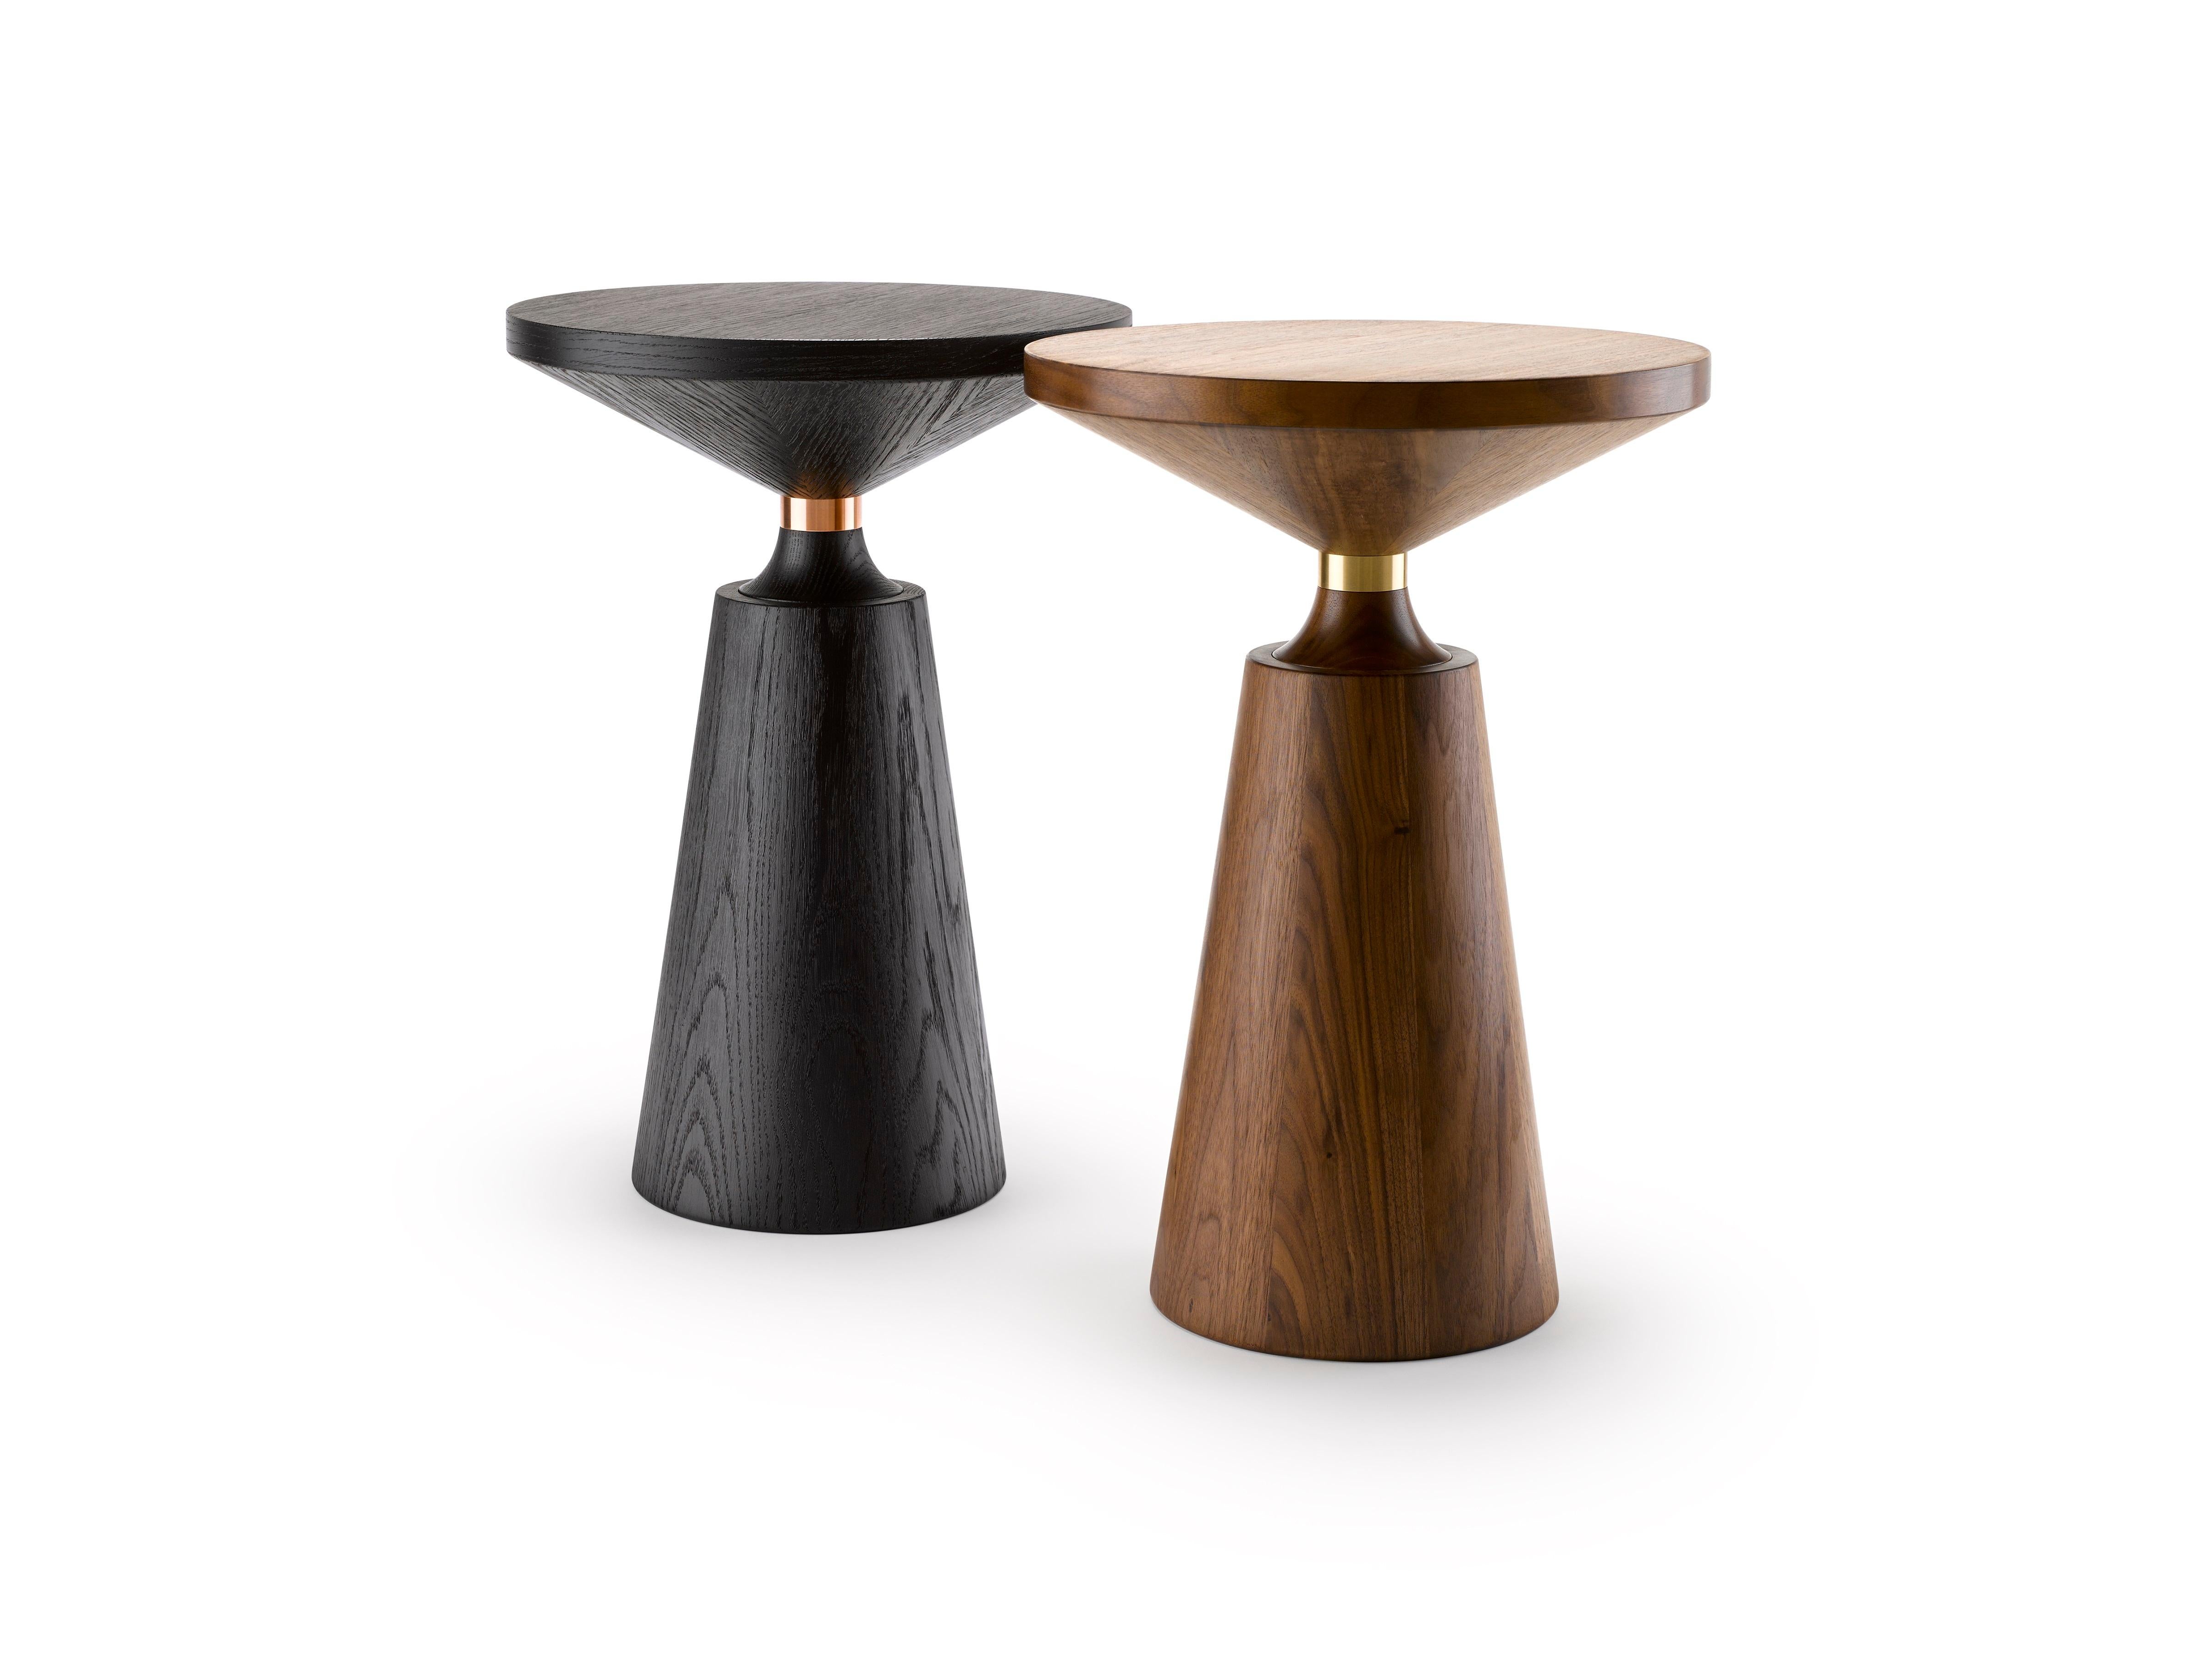 Turned by hand and using both solid and veneered timber, the Nicole Side Table has a simple but graphically striking Silhouette punctuated by the metal collar. Shown here in oiled walnut and brass (main) and also in black lacquered walnut and